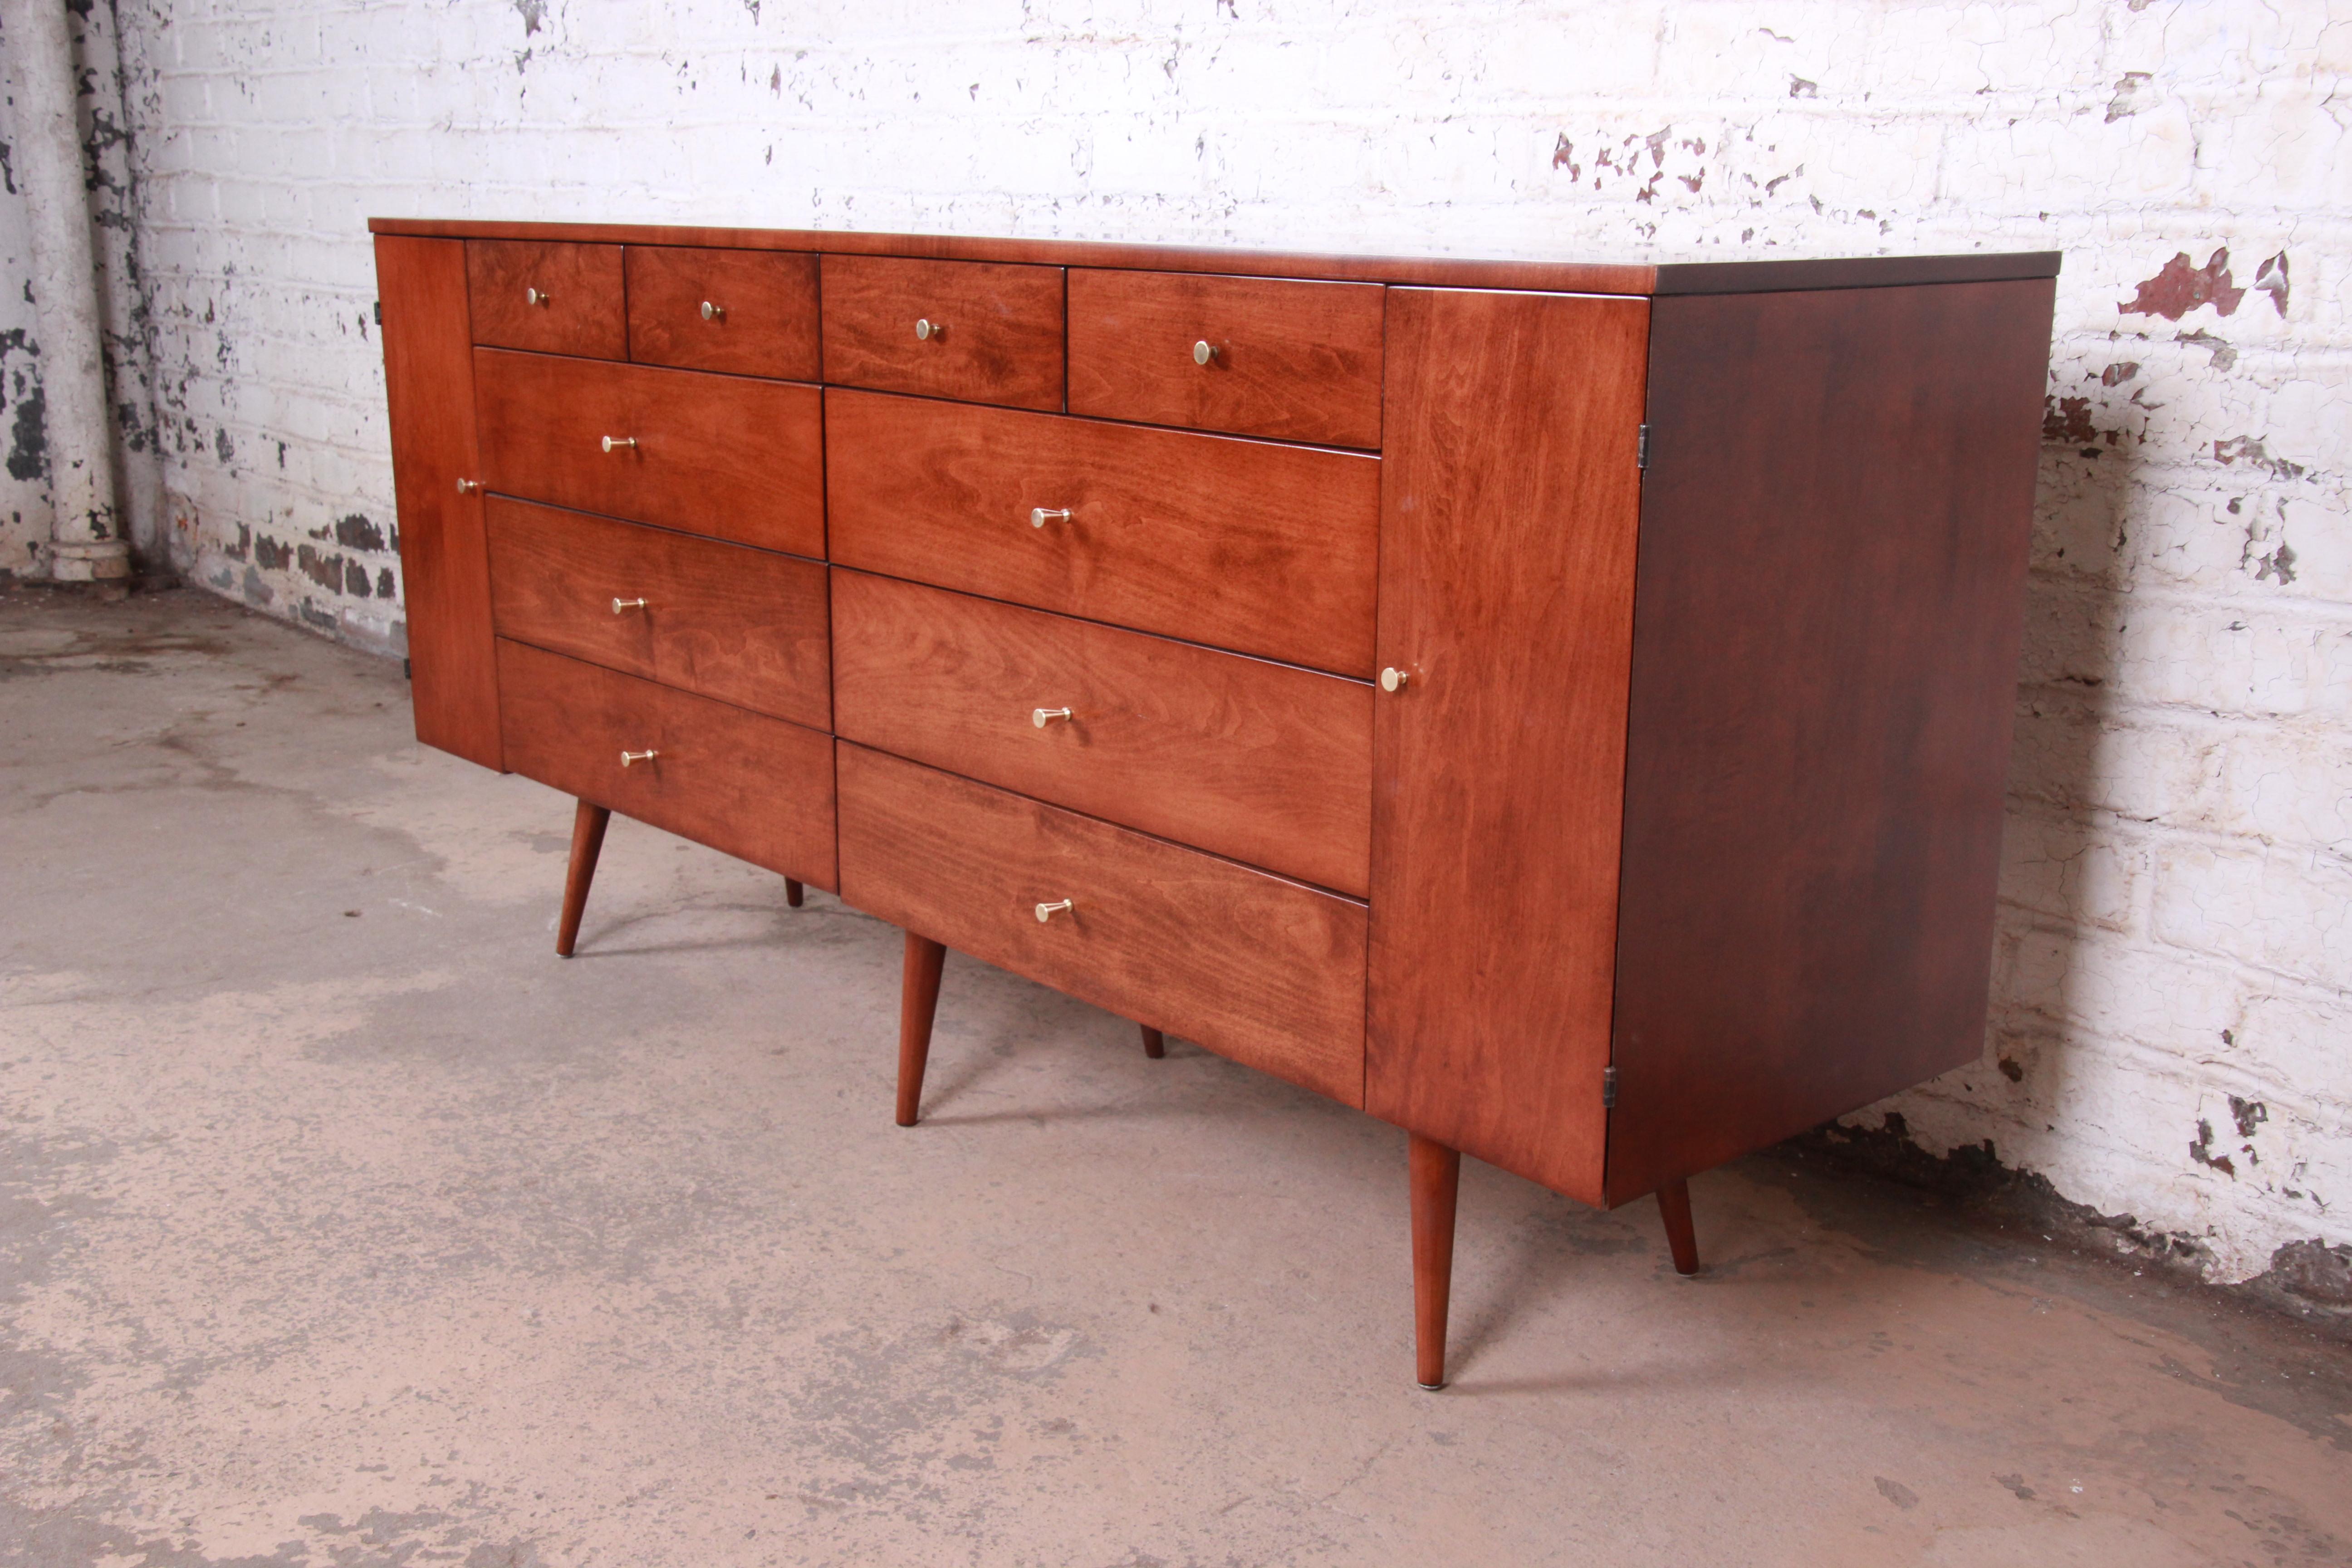 A rare and exceptional Mid-Century Modern 20-drawer long dresser or credenza designed by Paul McCobb for his Planner Group line for Winchendon Furniture. The credenza features solid birch construction with gorgeous wood grain. It offers ample